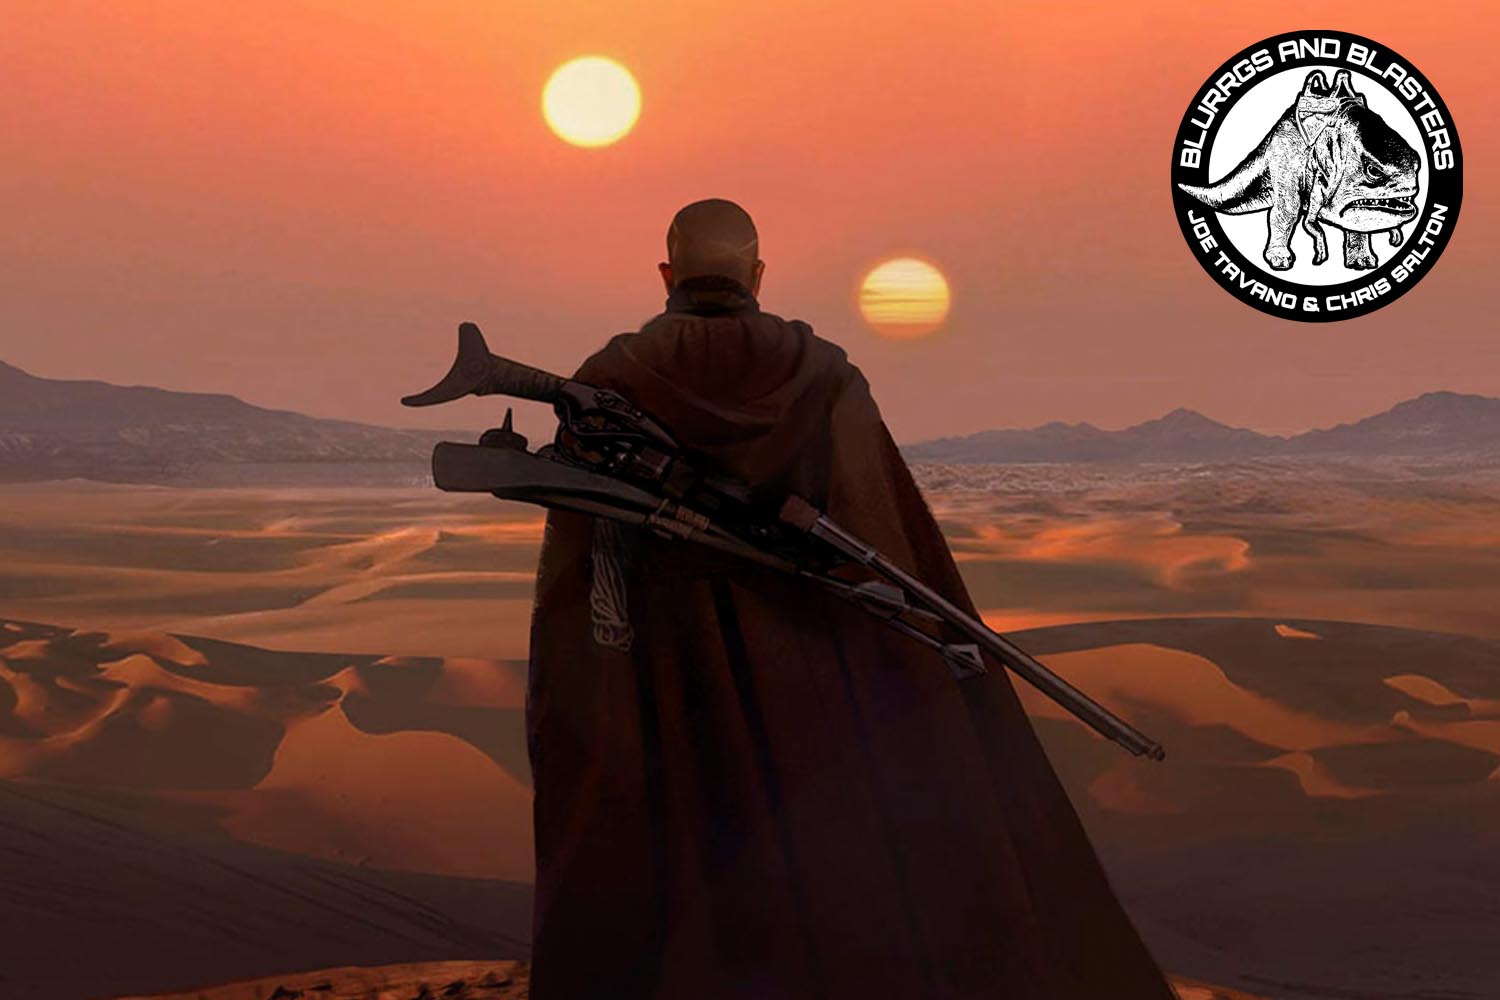 Blurrgs and Blasters: The Mandalorian, Chapter 9: The Marshal (Brews and Blasters 273)